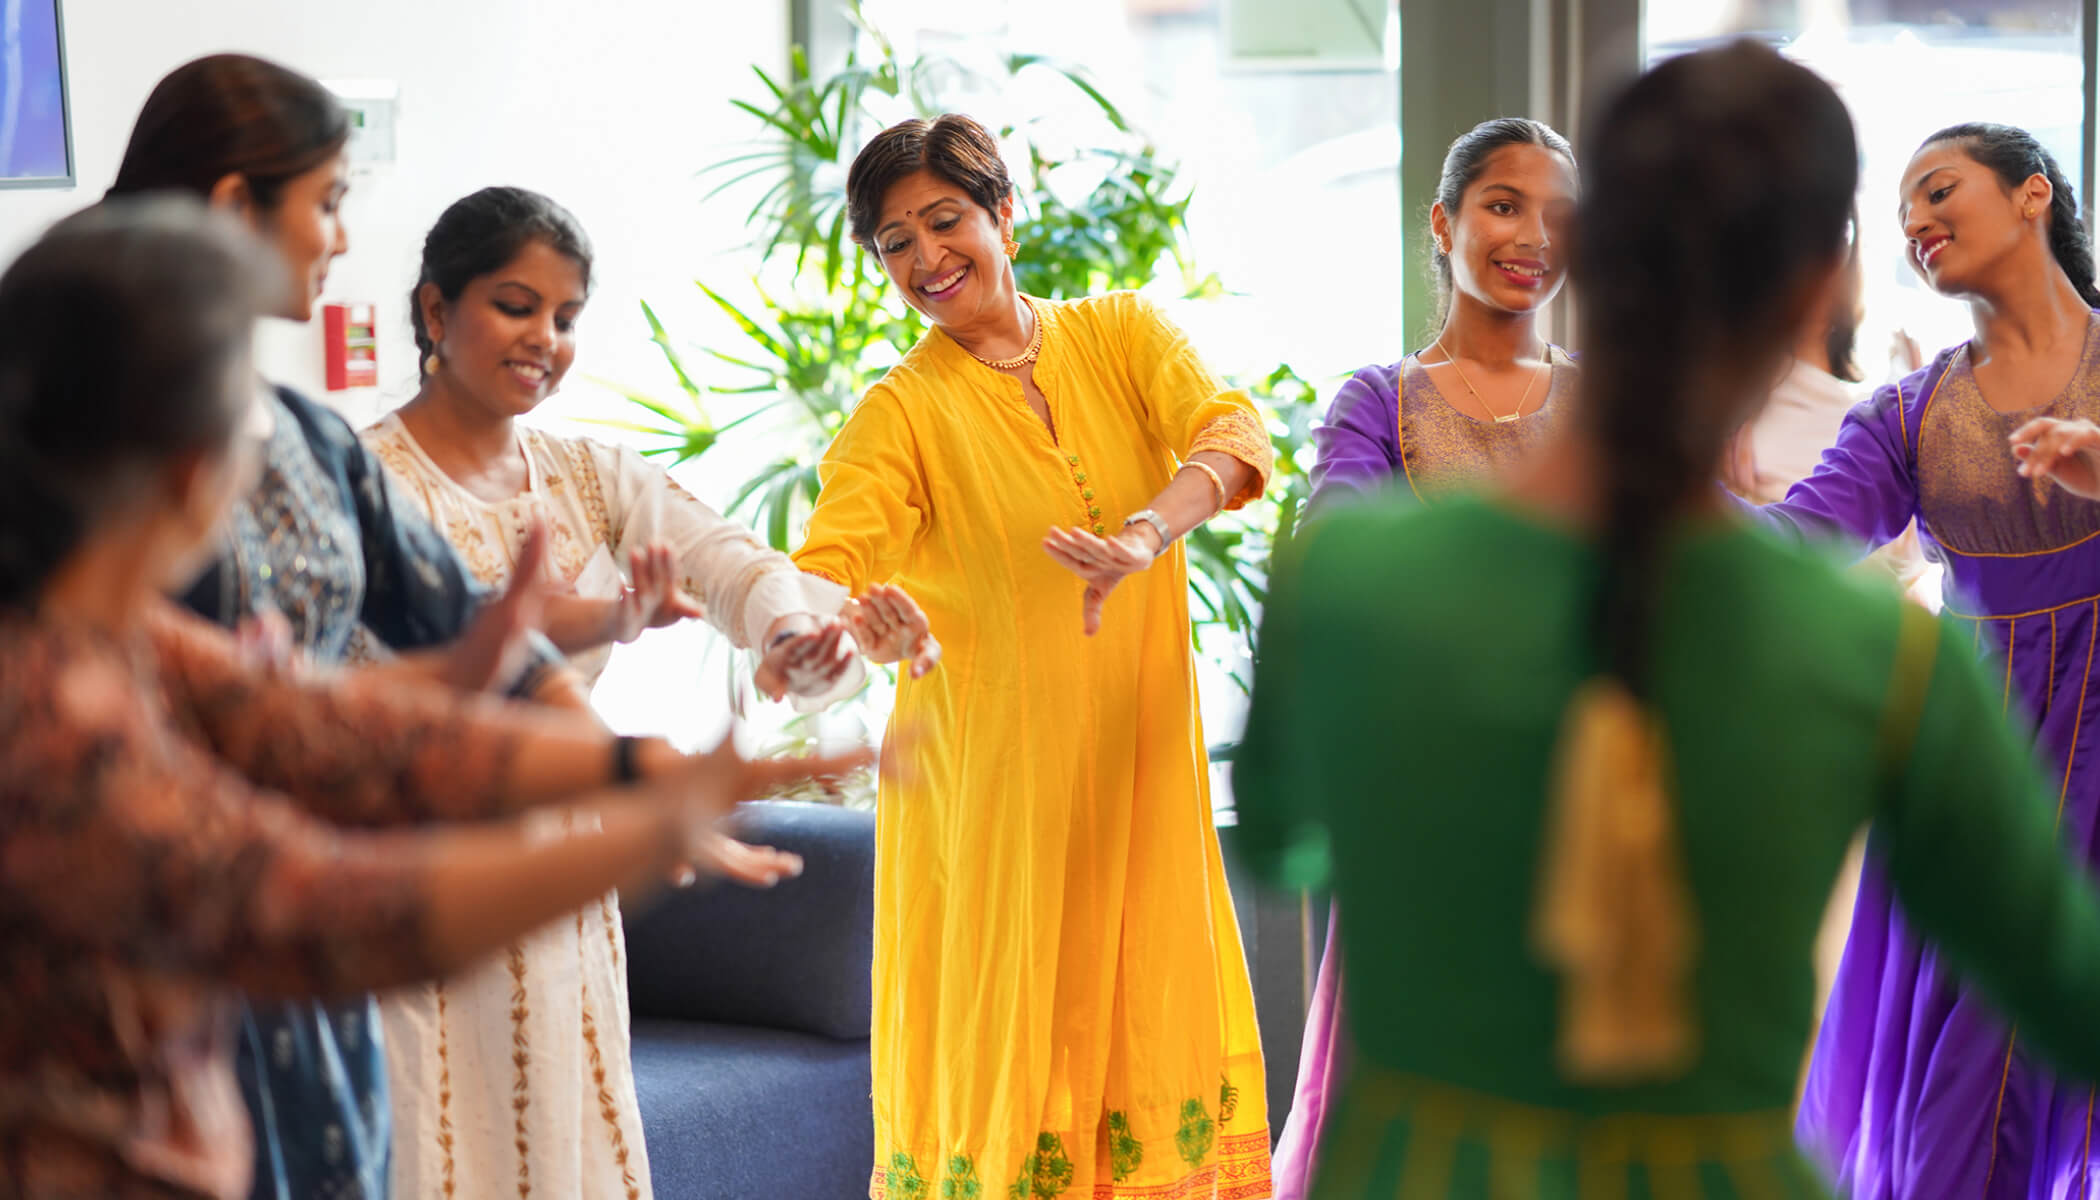 A group of women in colorful traditional South Asian attire are smiling and dancing together with hand gestures in an indoor setting with plants in the background.